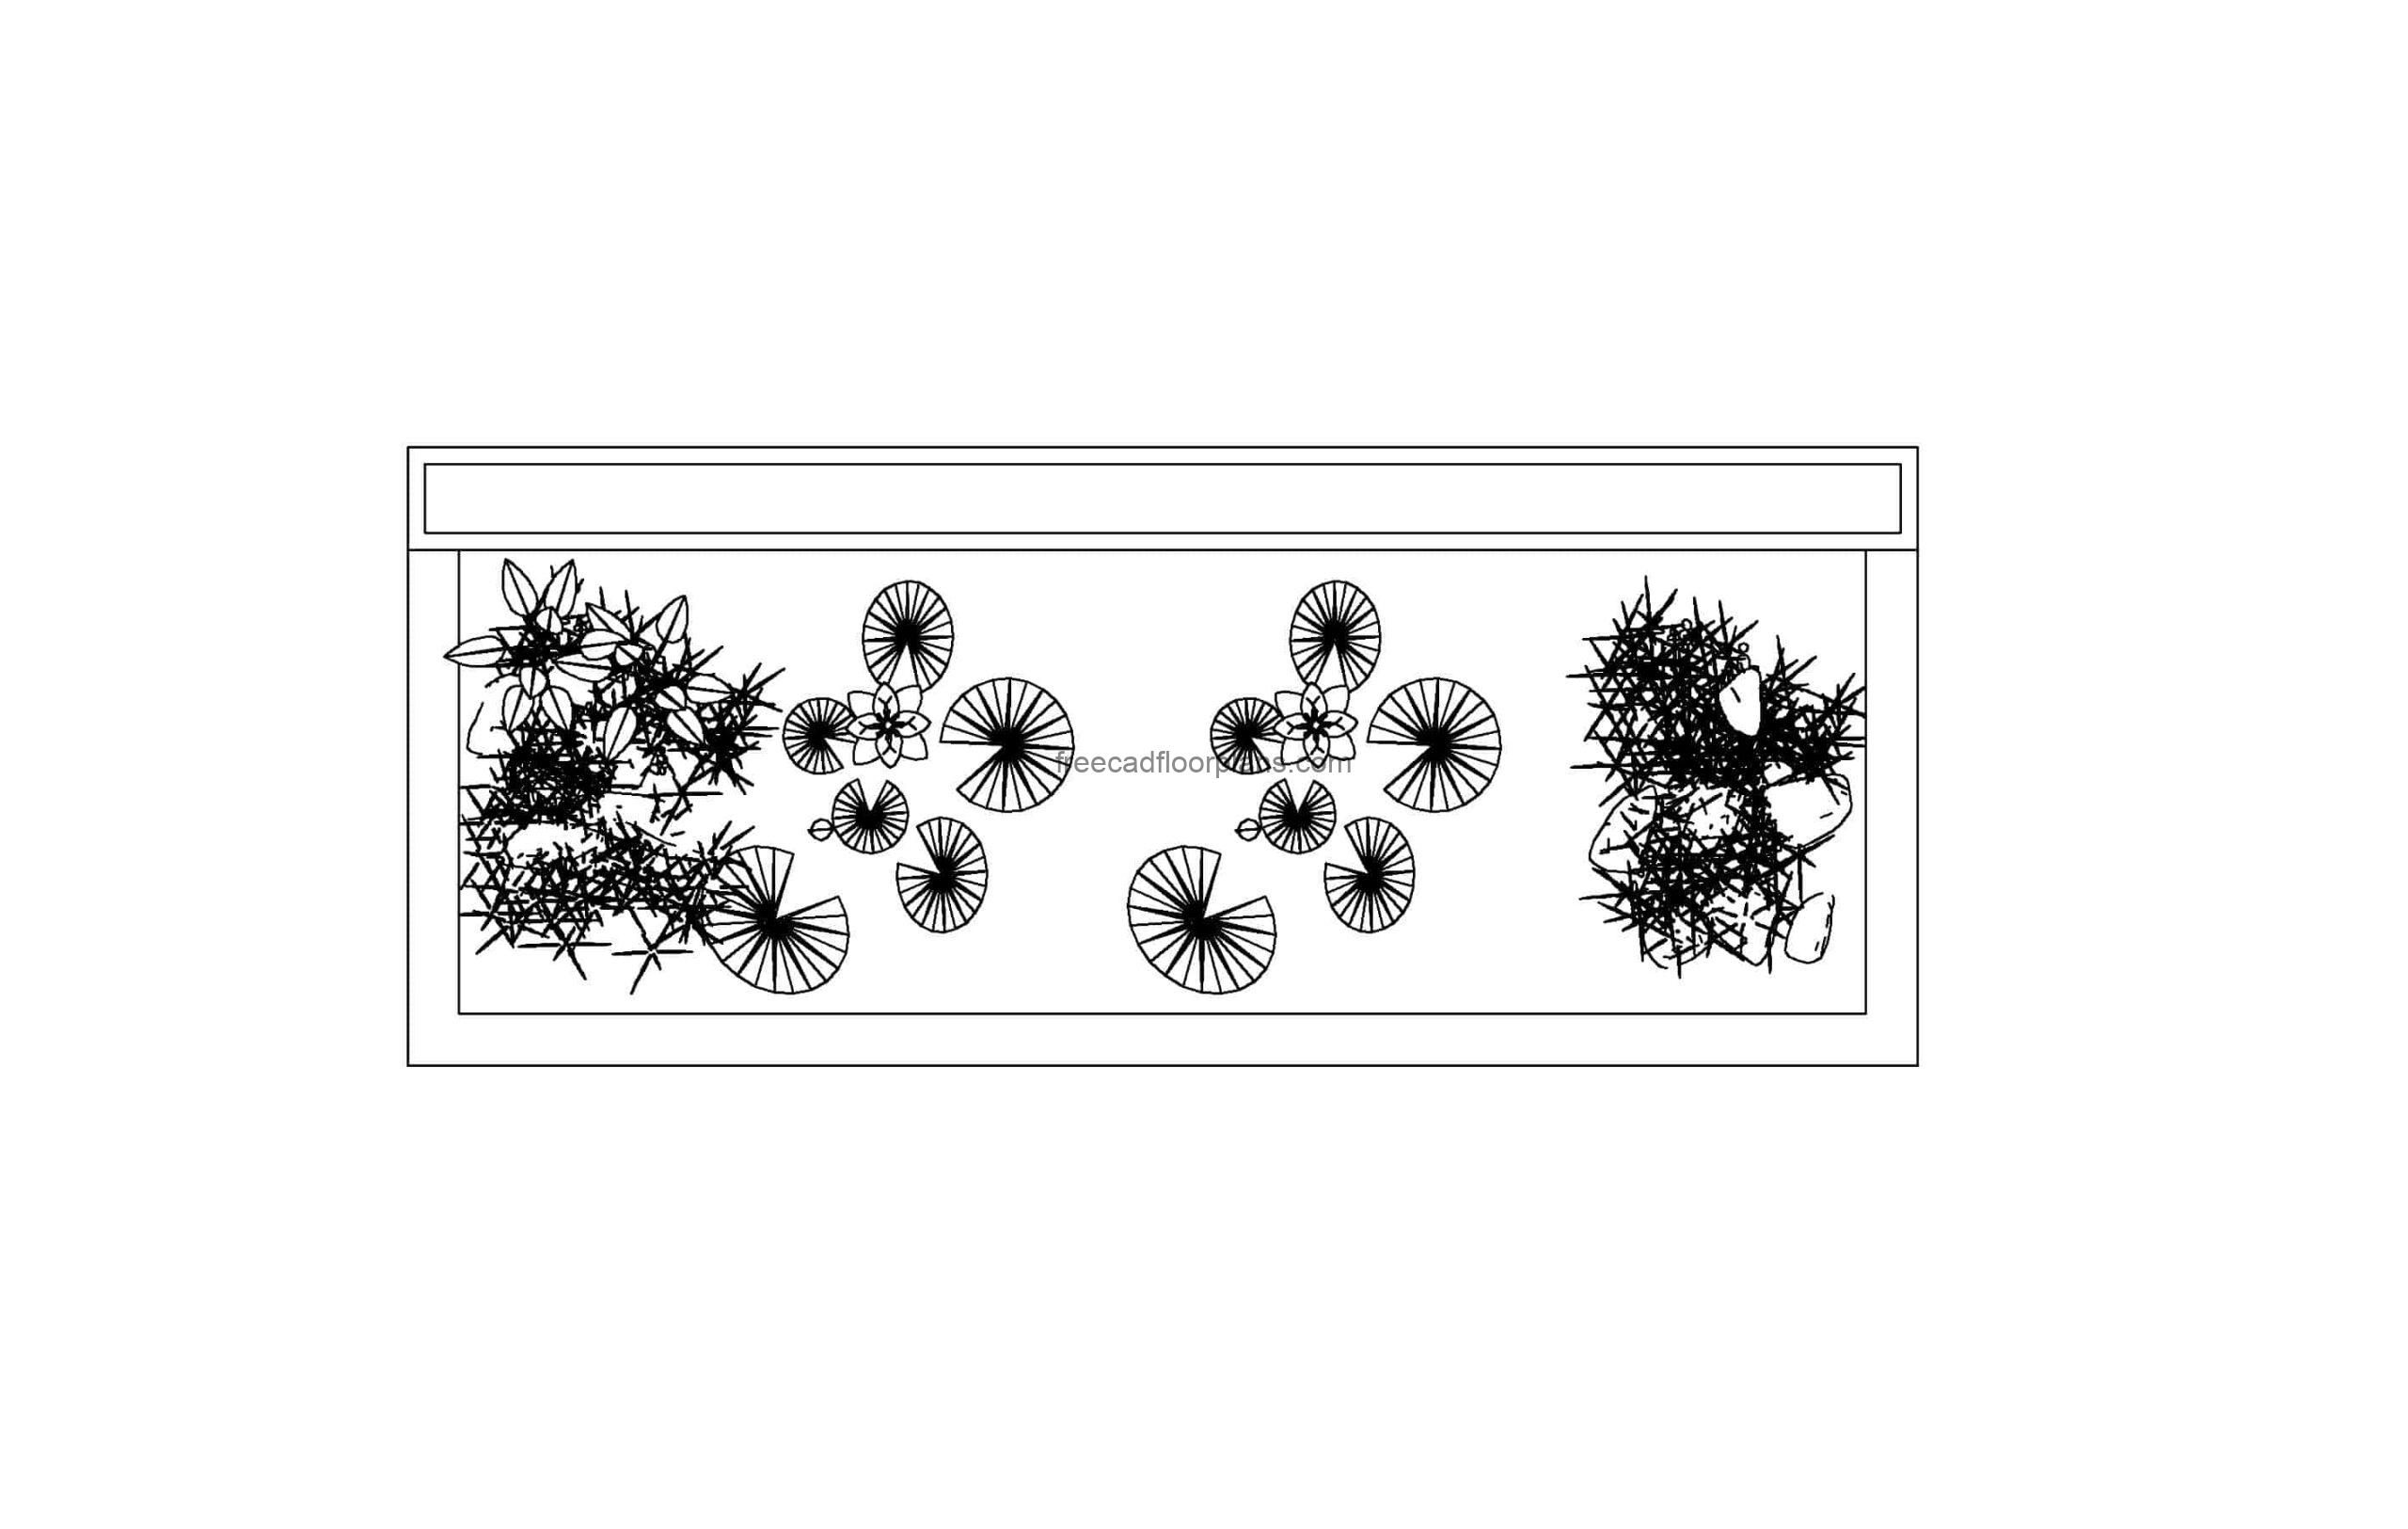 autocad drawing of a lily pond for a gardem plan 2d views, dwg file for free download